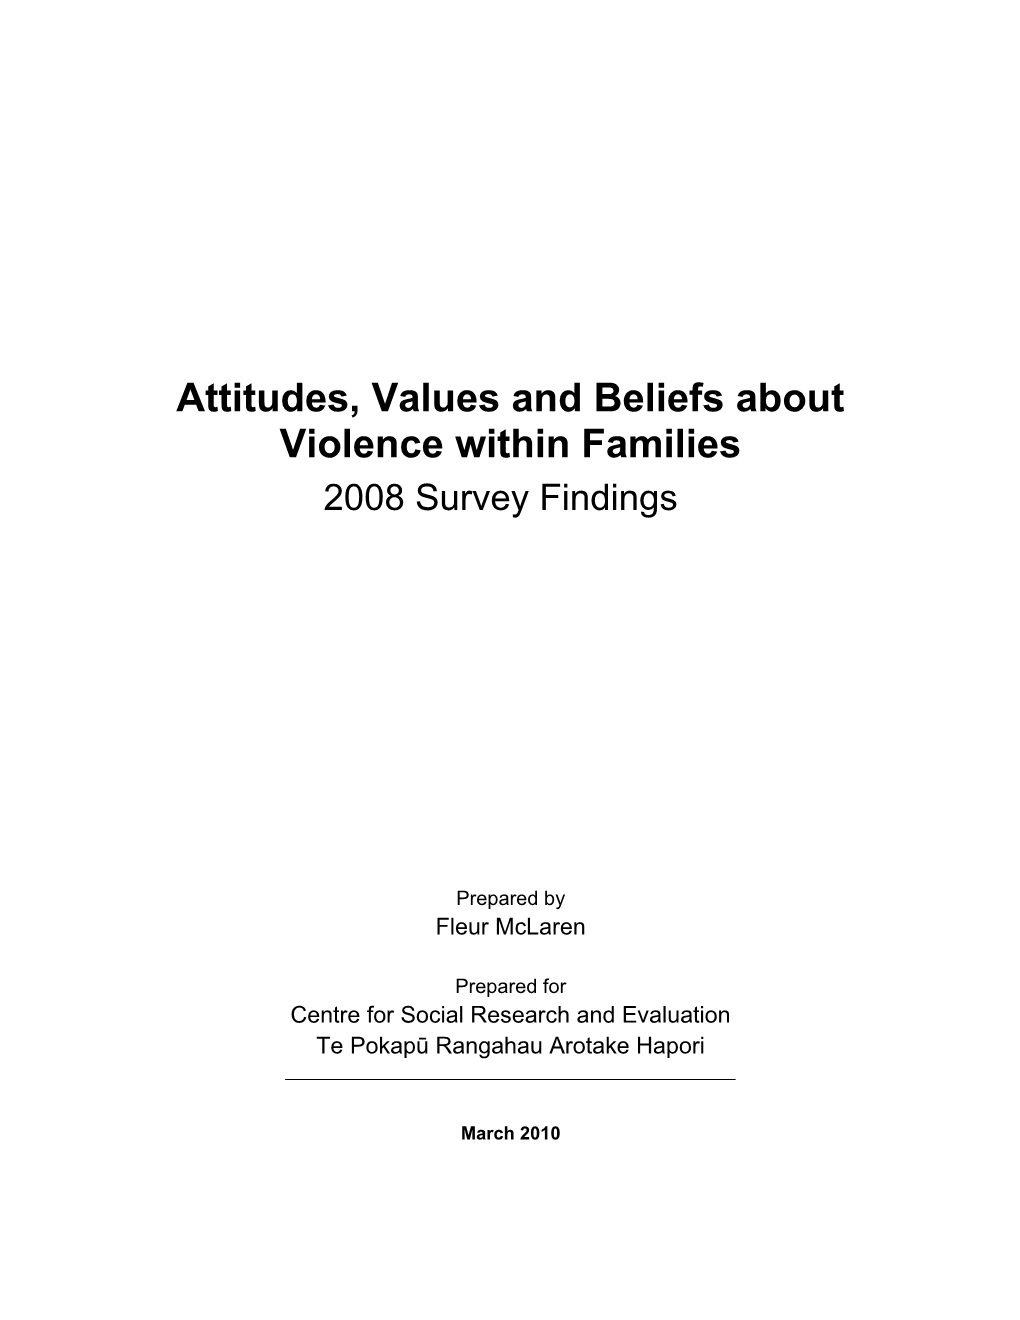 Attitudes Values and Beliefs About Violence Within Families